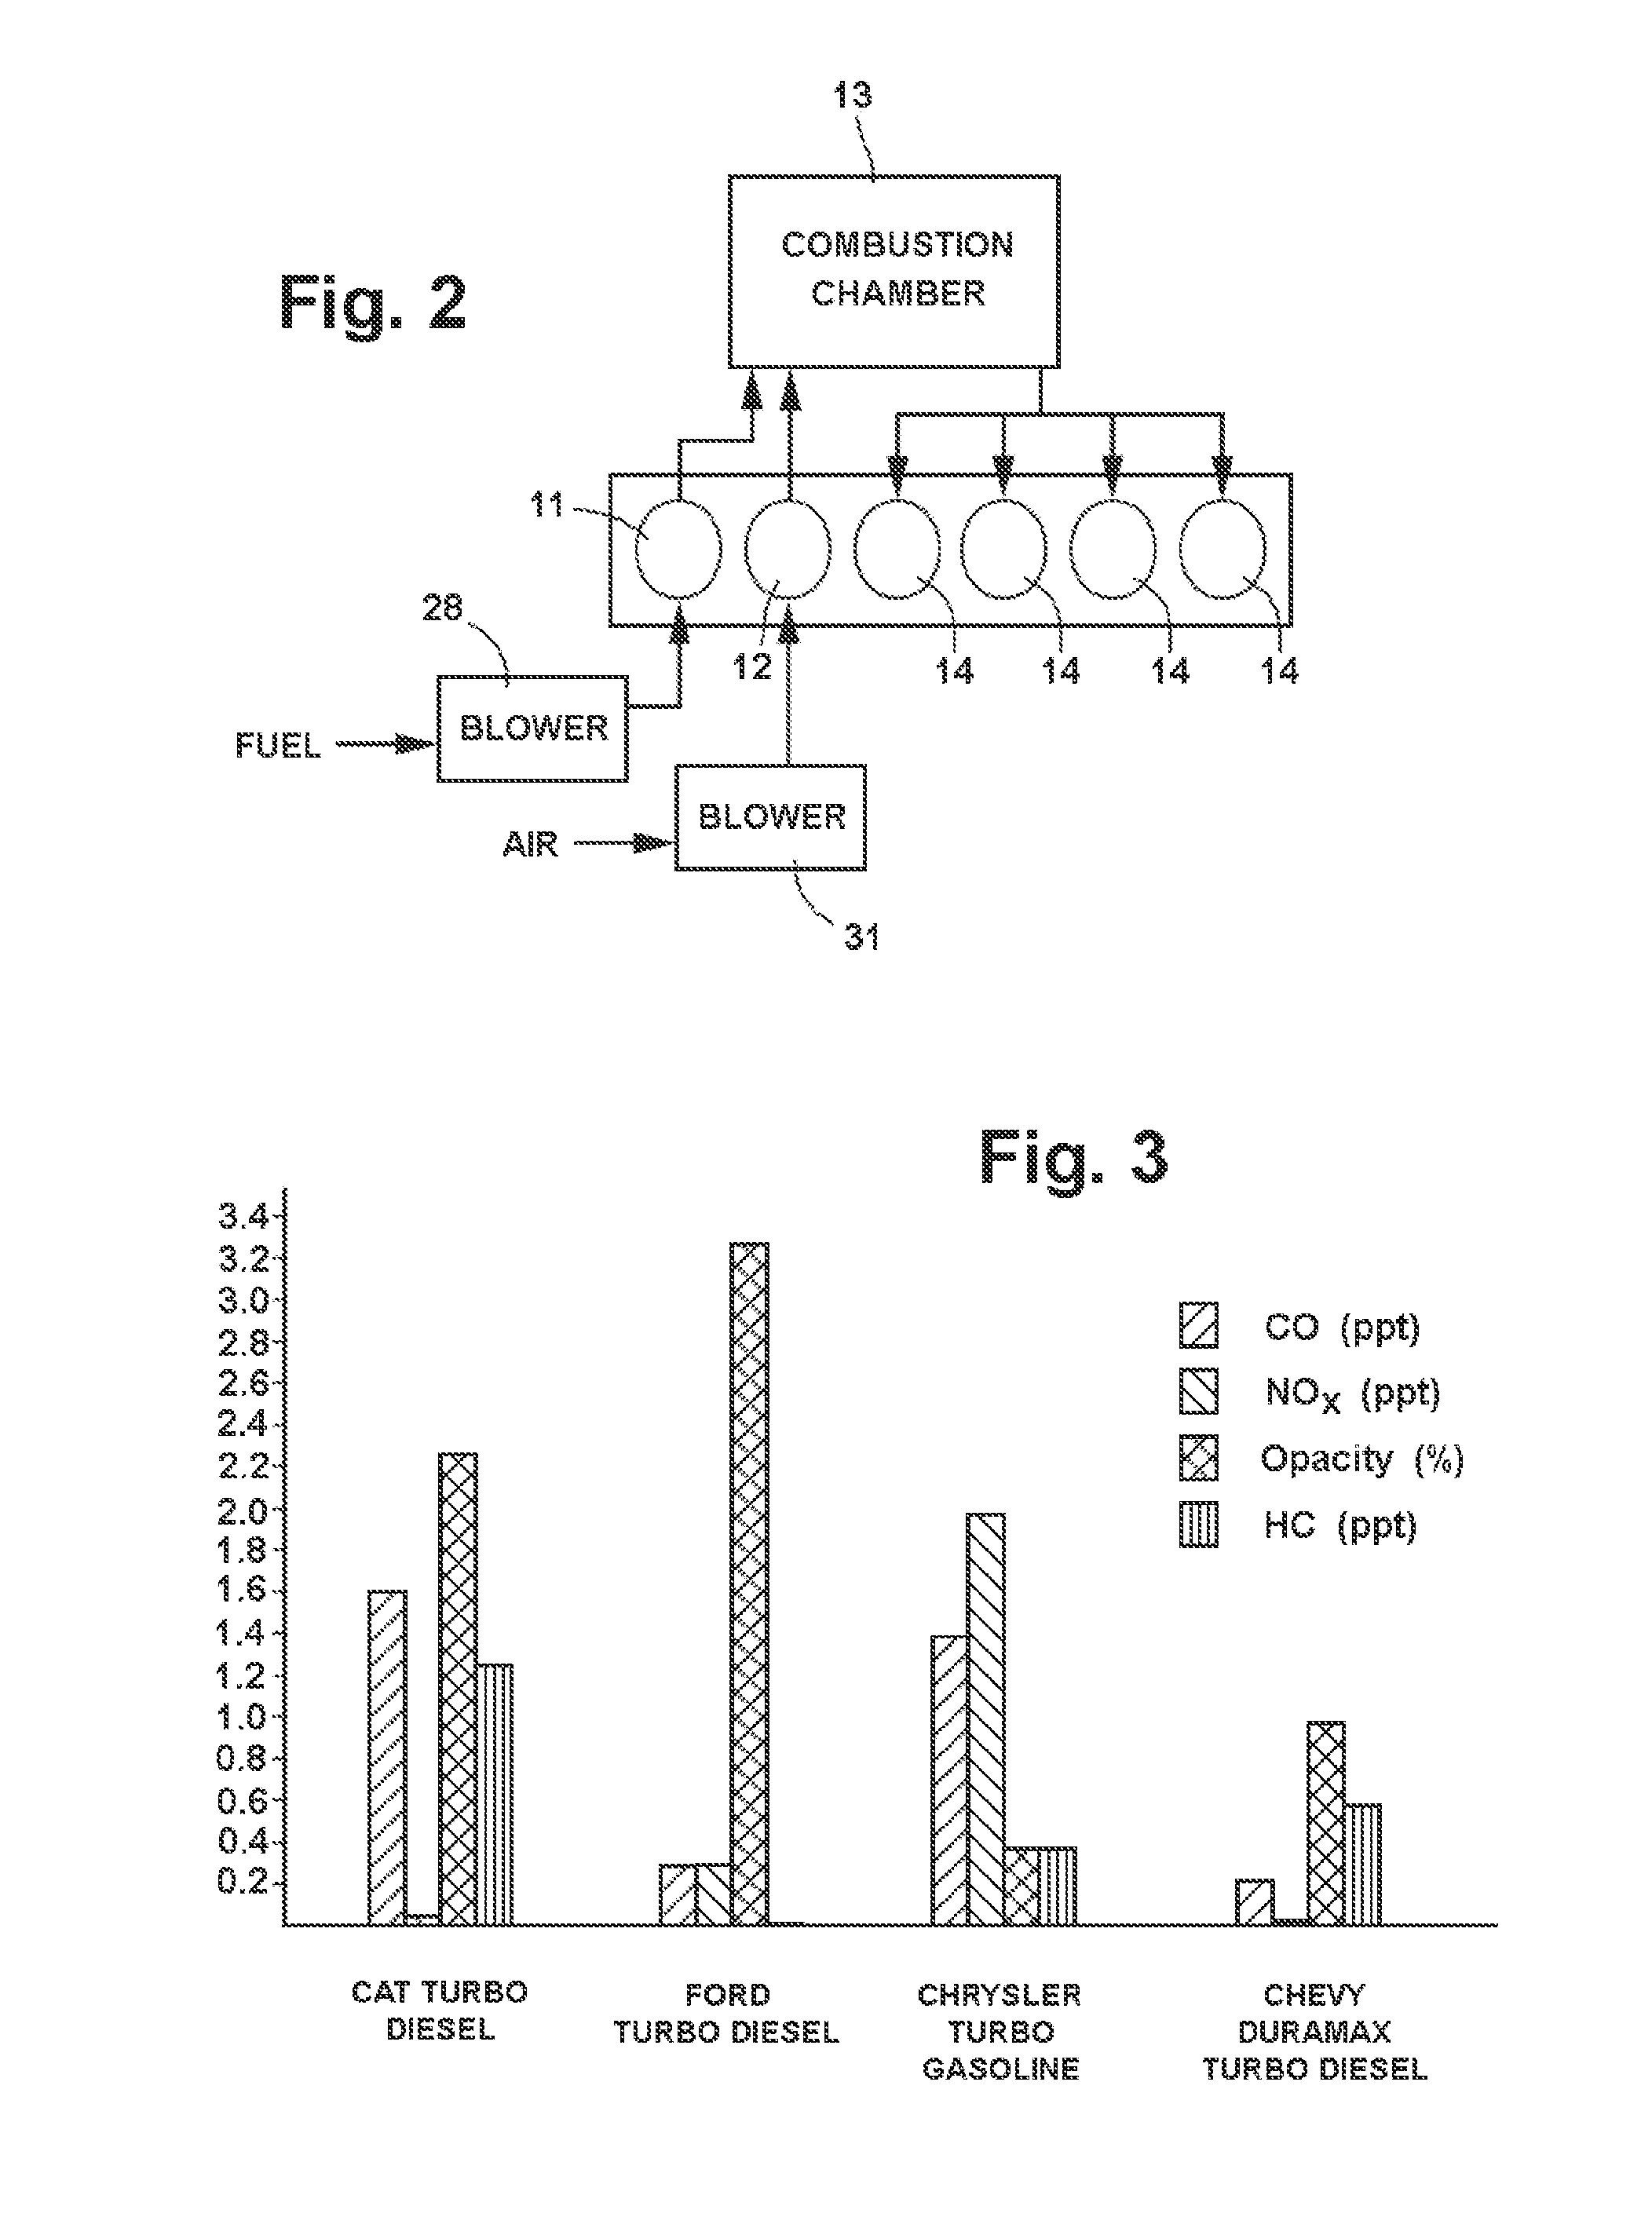 Split Cycle Engine and Method of Operation